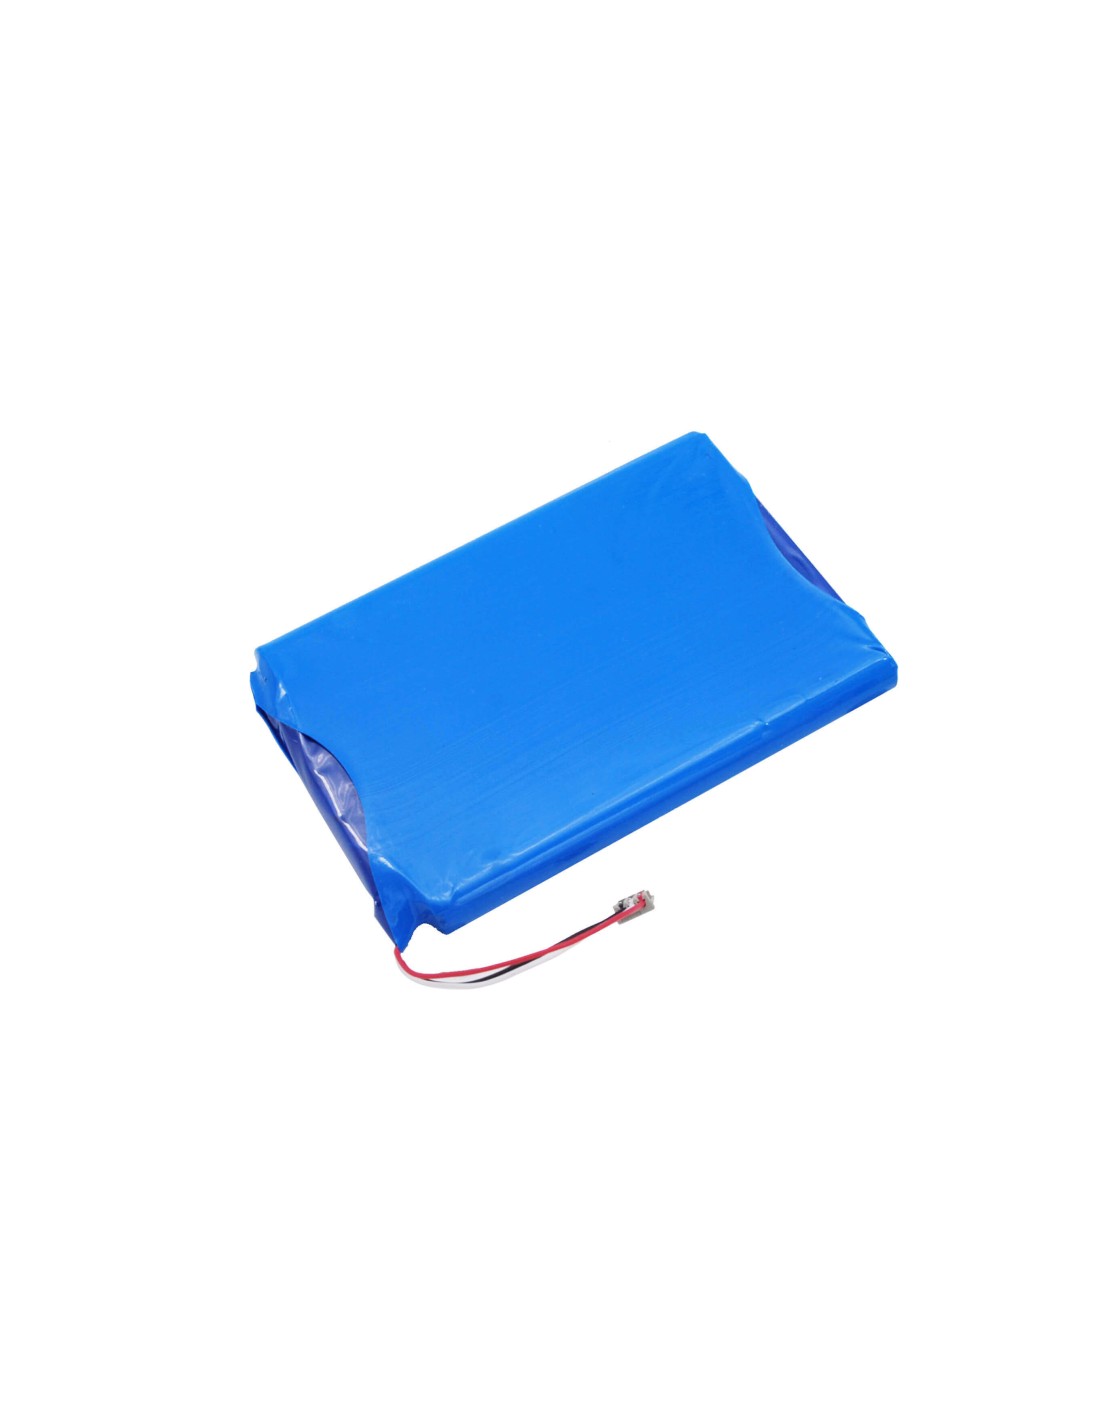 Battery for Skygolf Skycaddie Touch, X8f-sctouch, 3.7V, 1200mAh - 4.44Wh